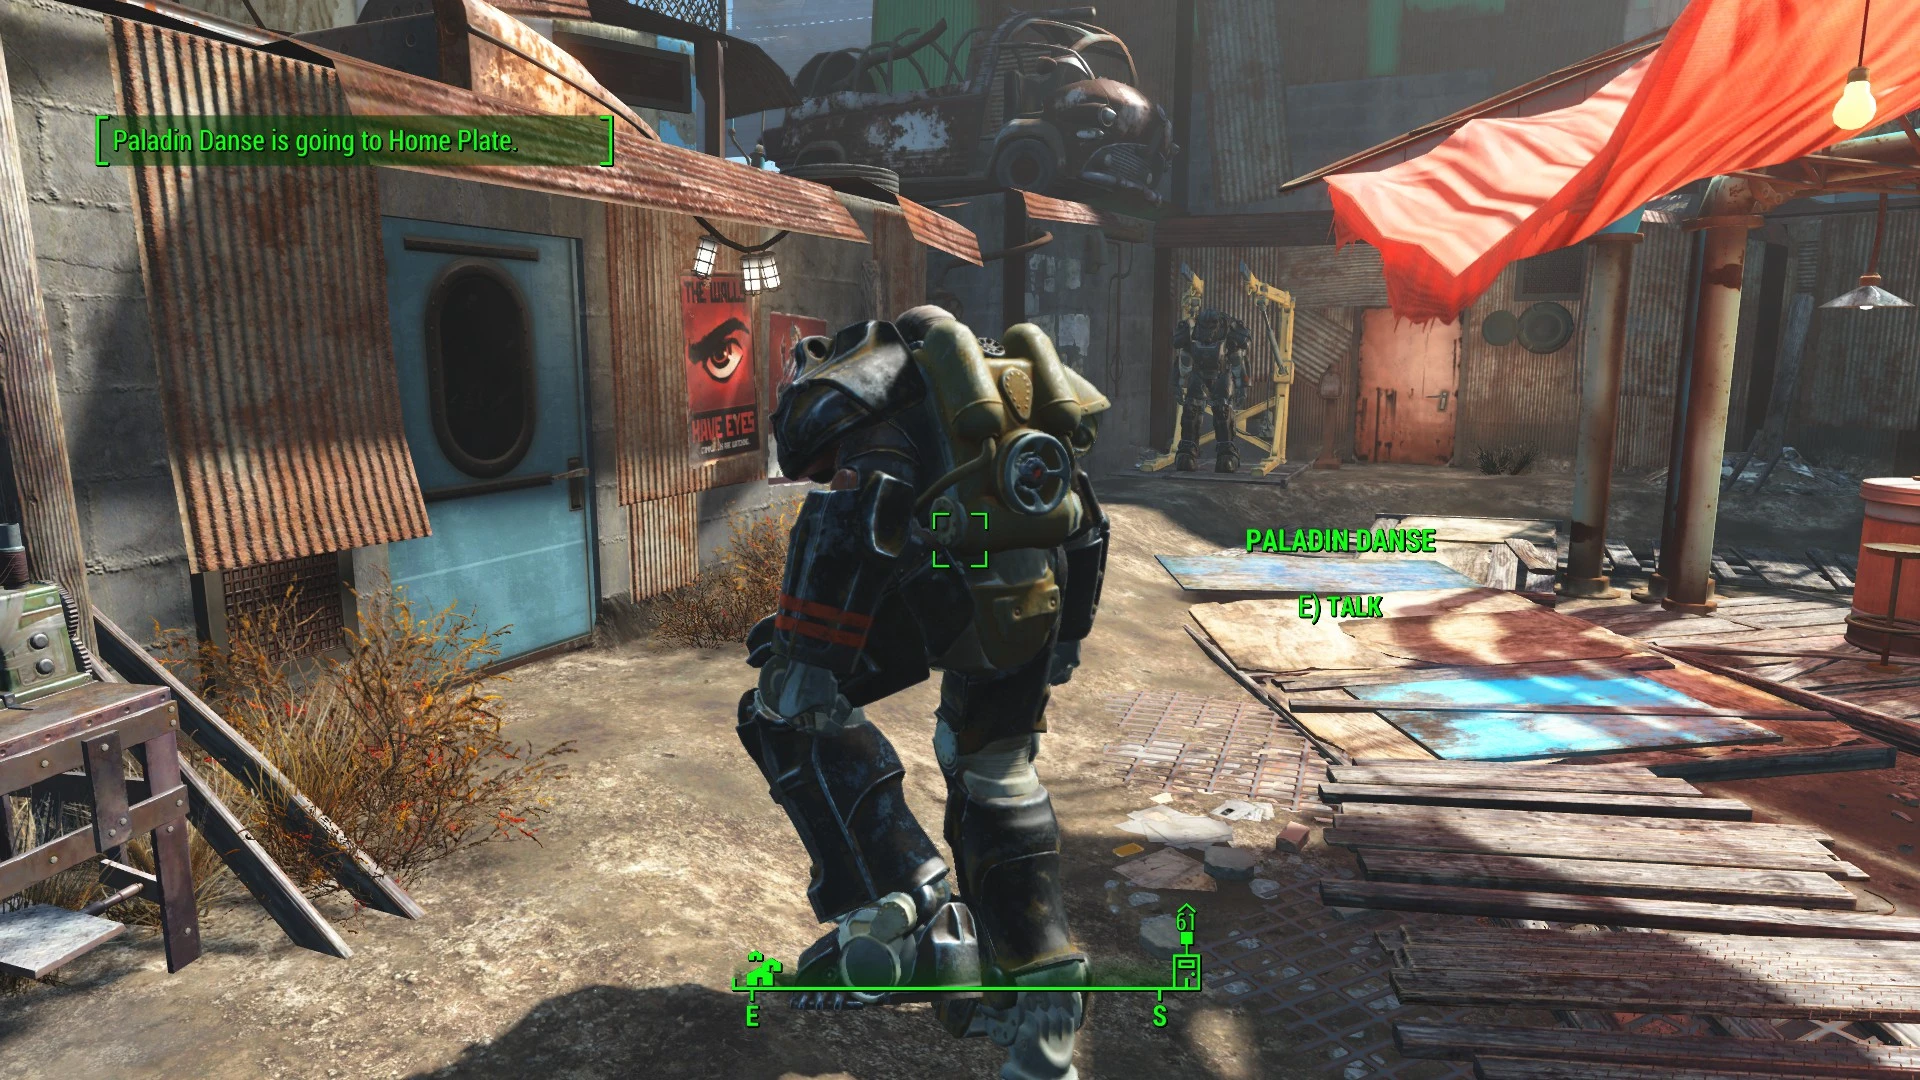 Companions Go Home At Fallout 4 Nexus Mods And Community